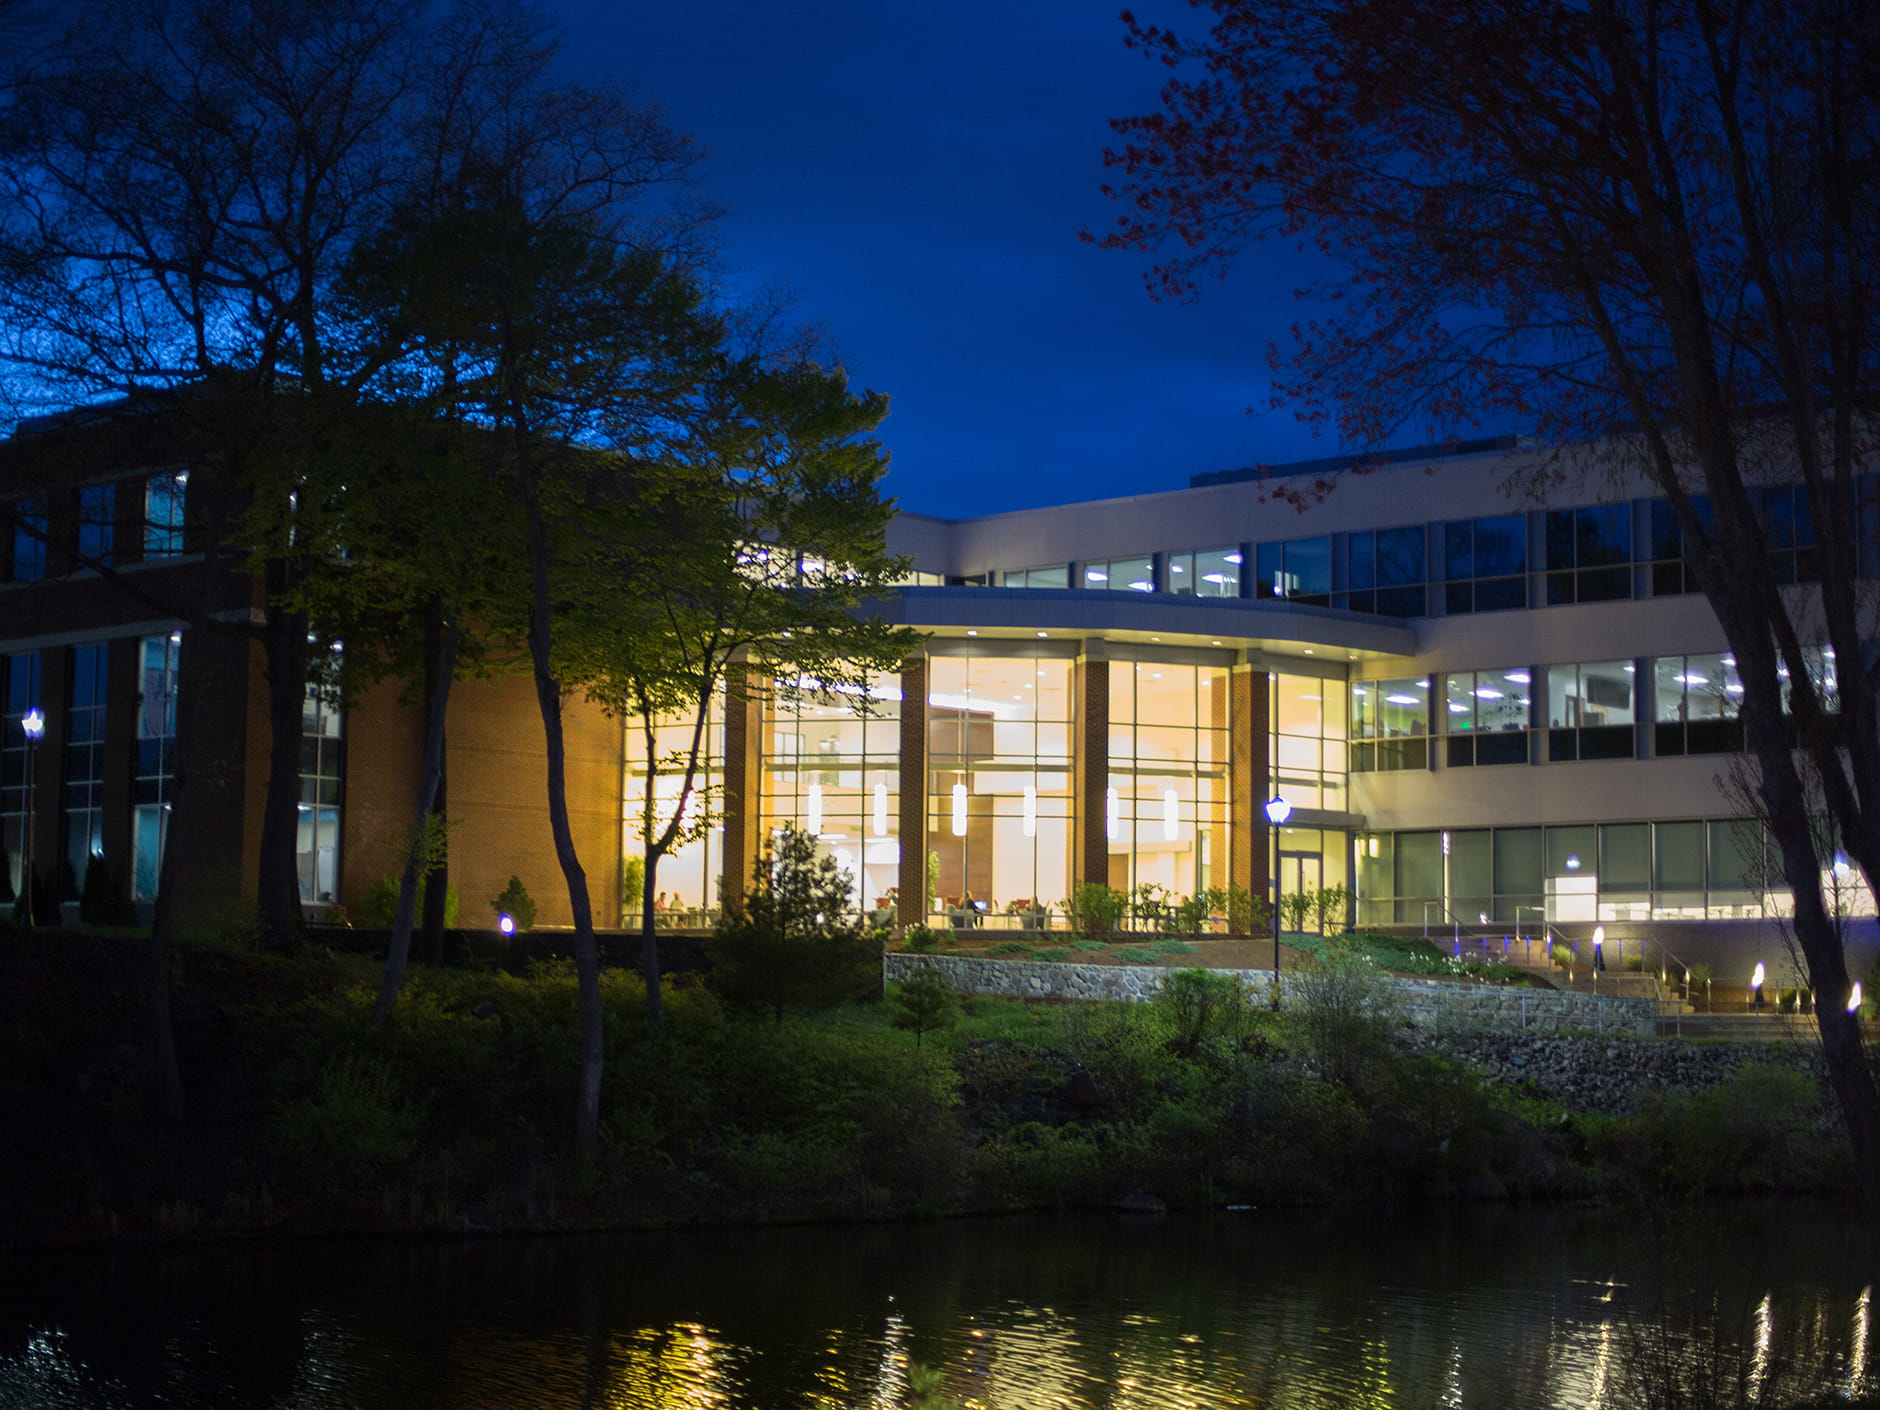 Night view of the Life Science Building